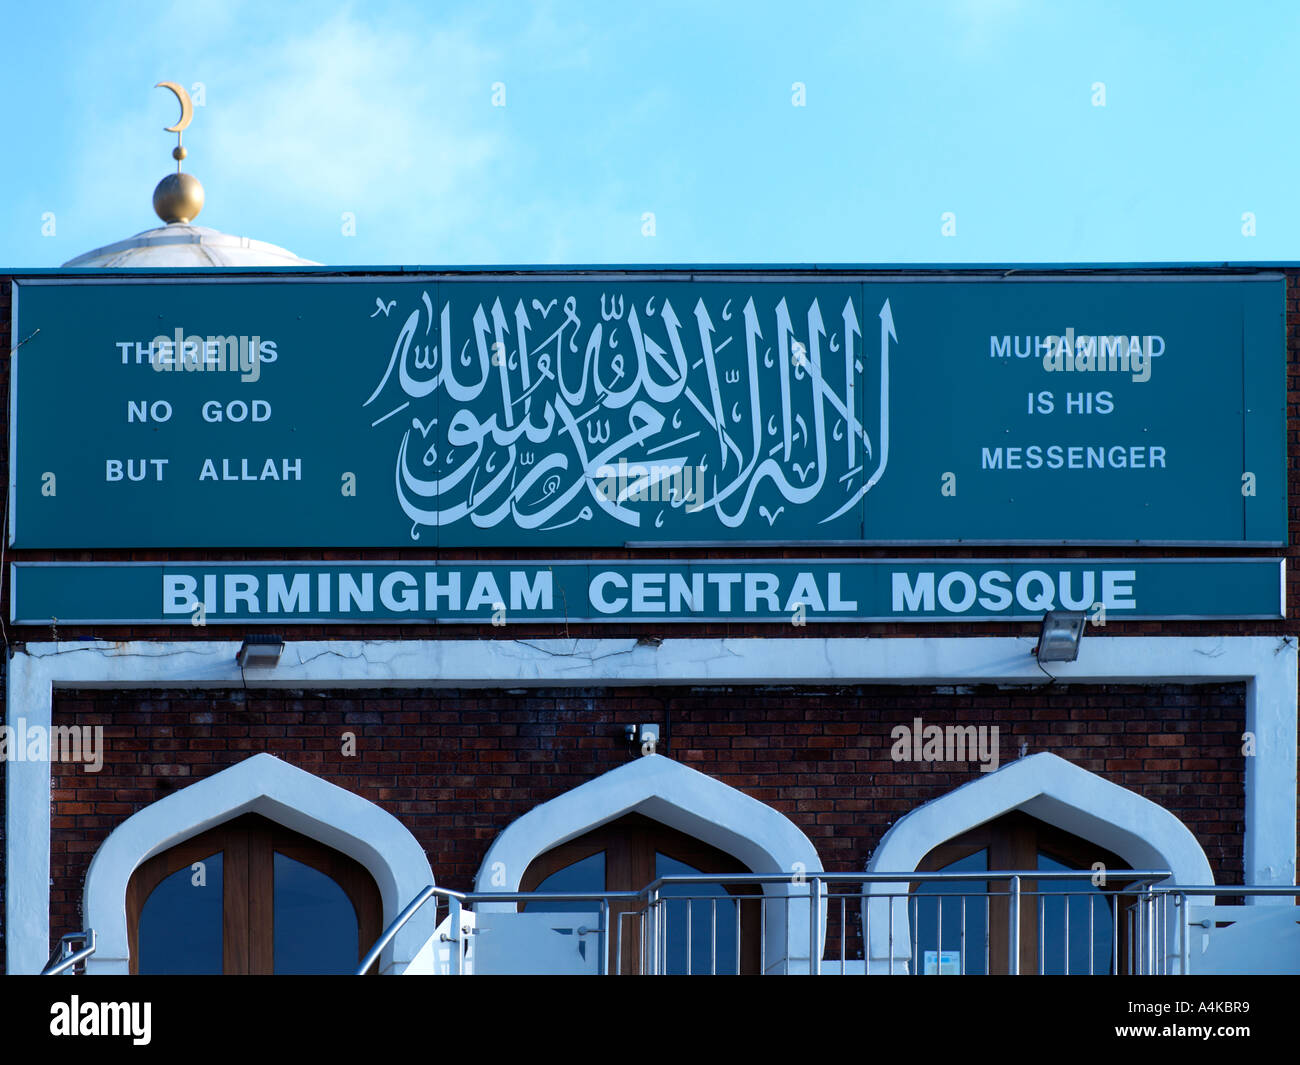 Birmingham West Midlands England Birmingham Central Mosque There is no God but Allah Muhammad is his Messenger Stock Photo